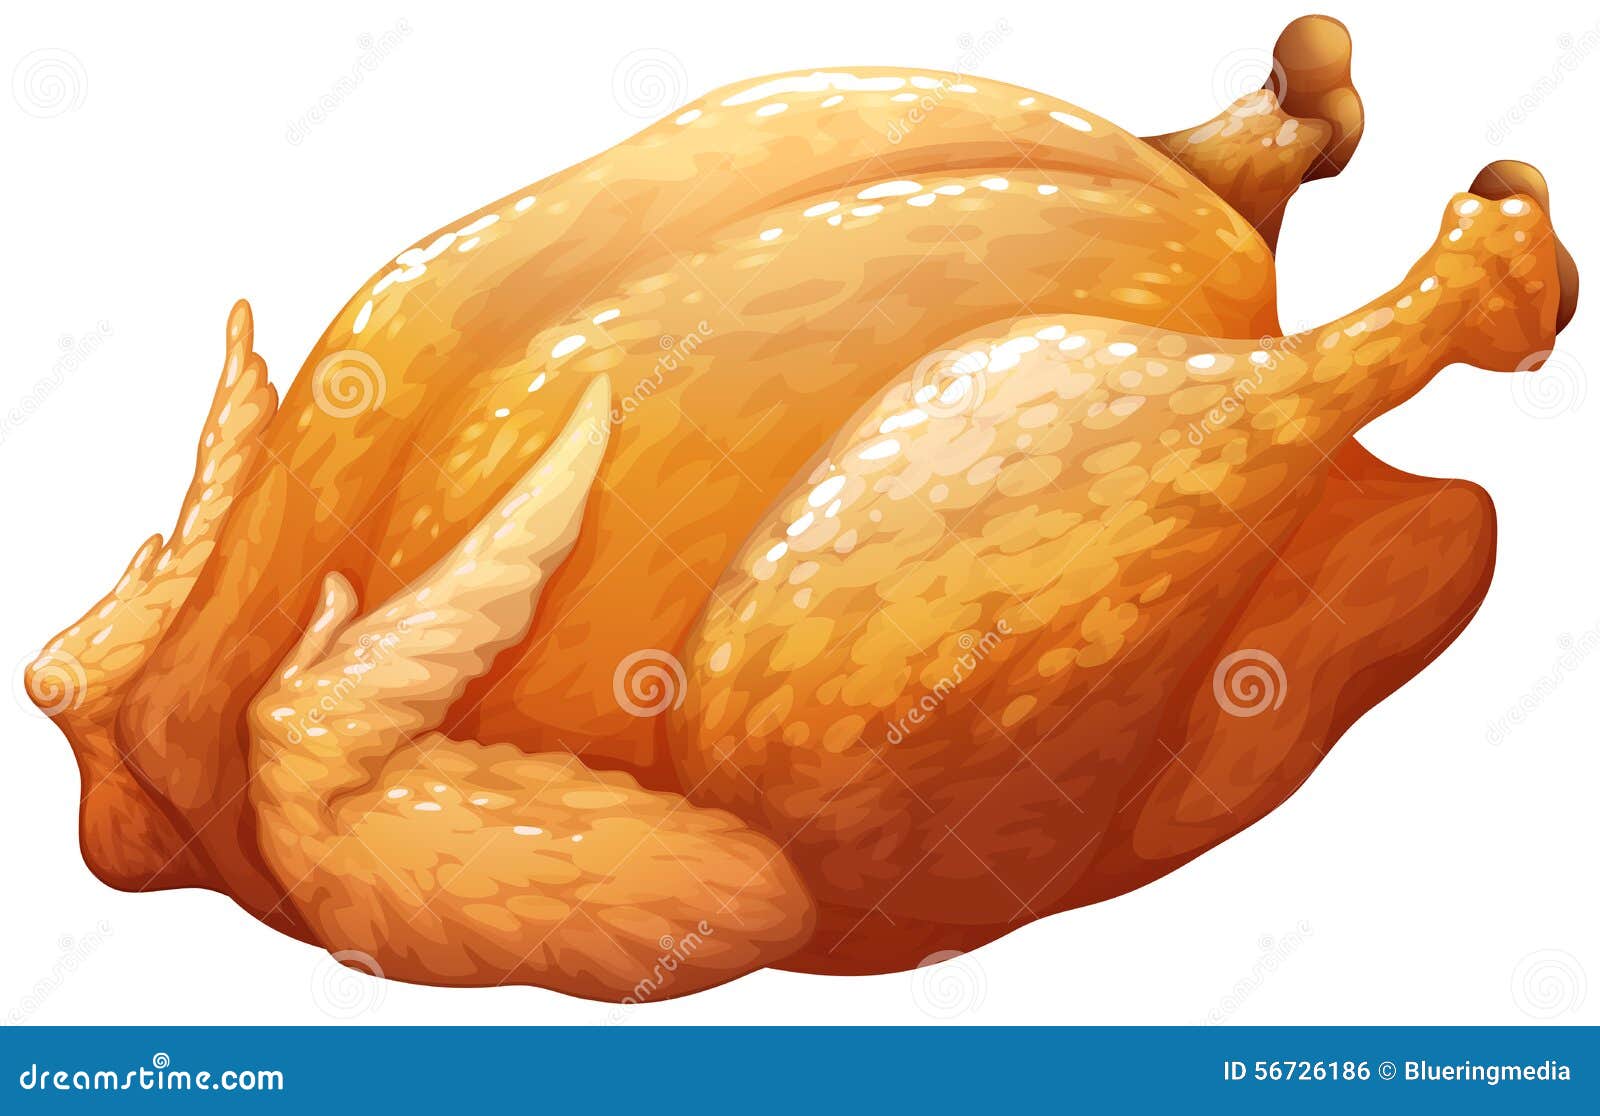 roasted chicken clipart free - photo #28